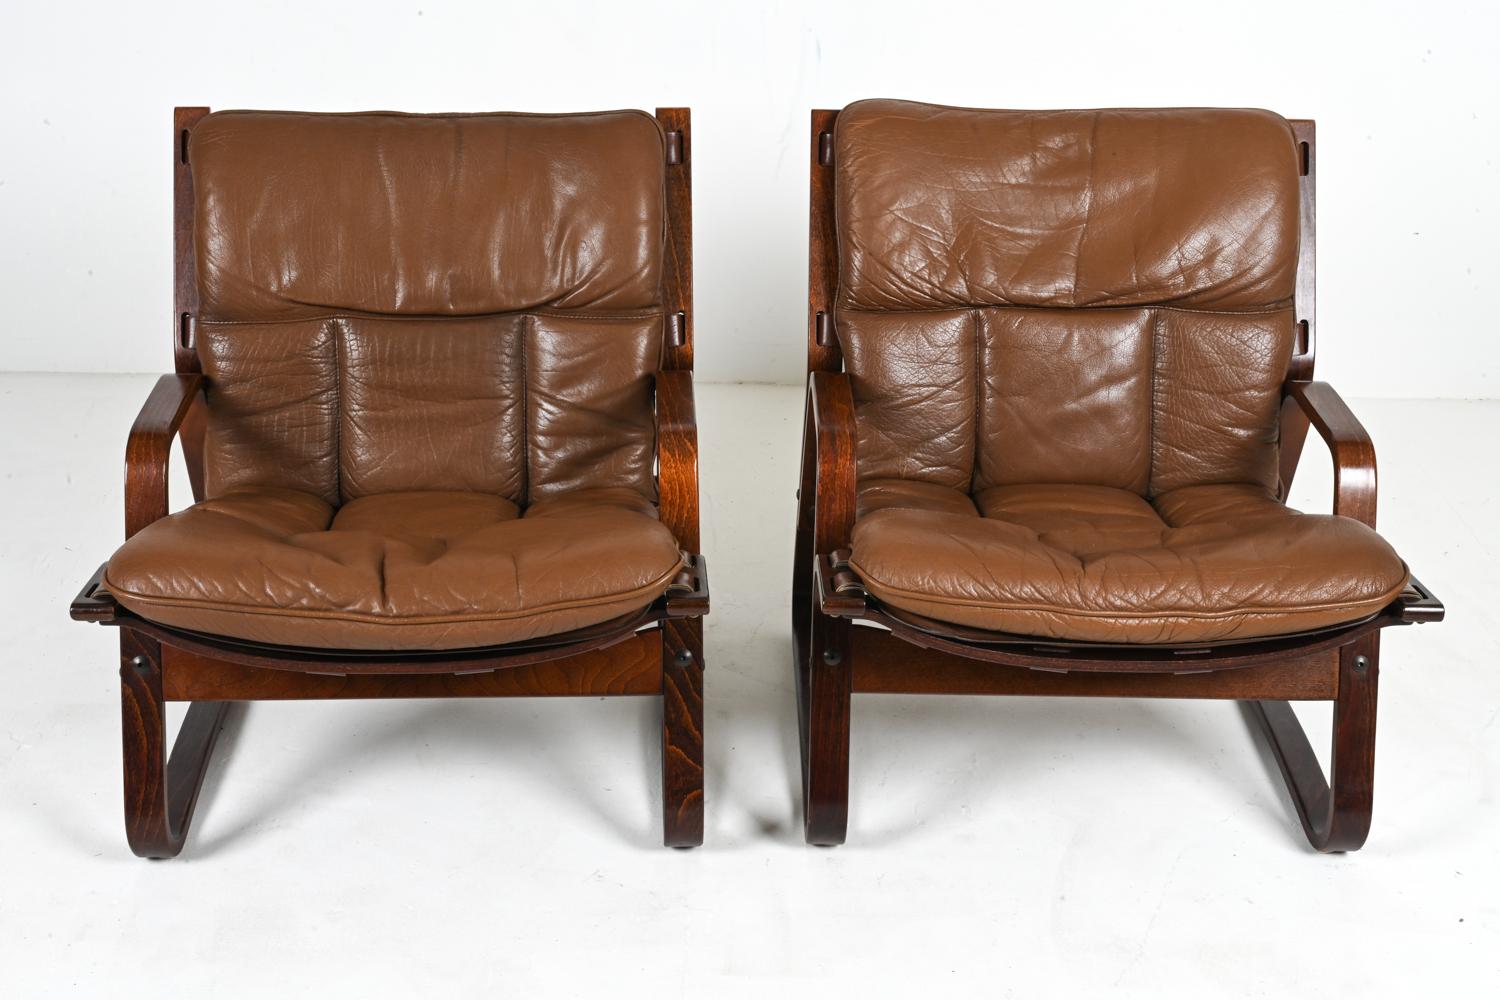 Scandinavian Modern Pair of Bentwood & Buffalo Leather Lounge Chairs by Giske Carlsen for Kleppe For Sale